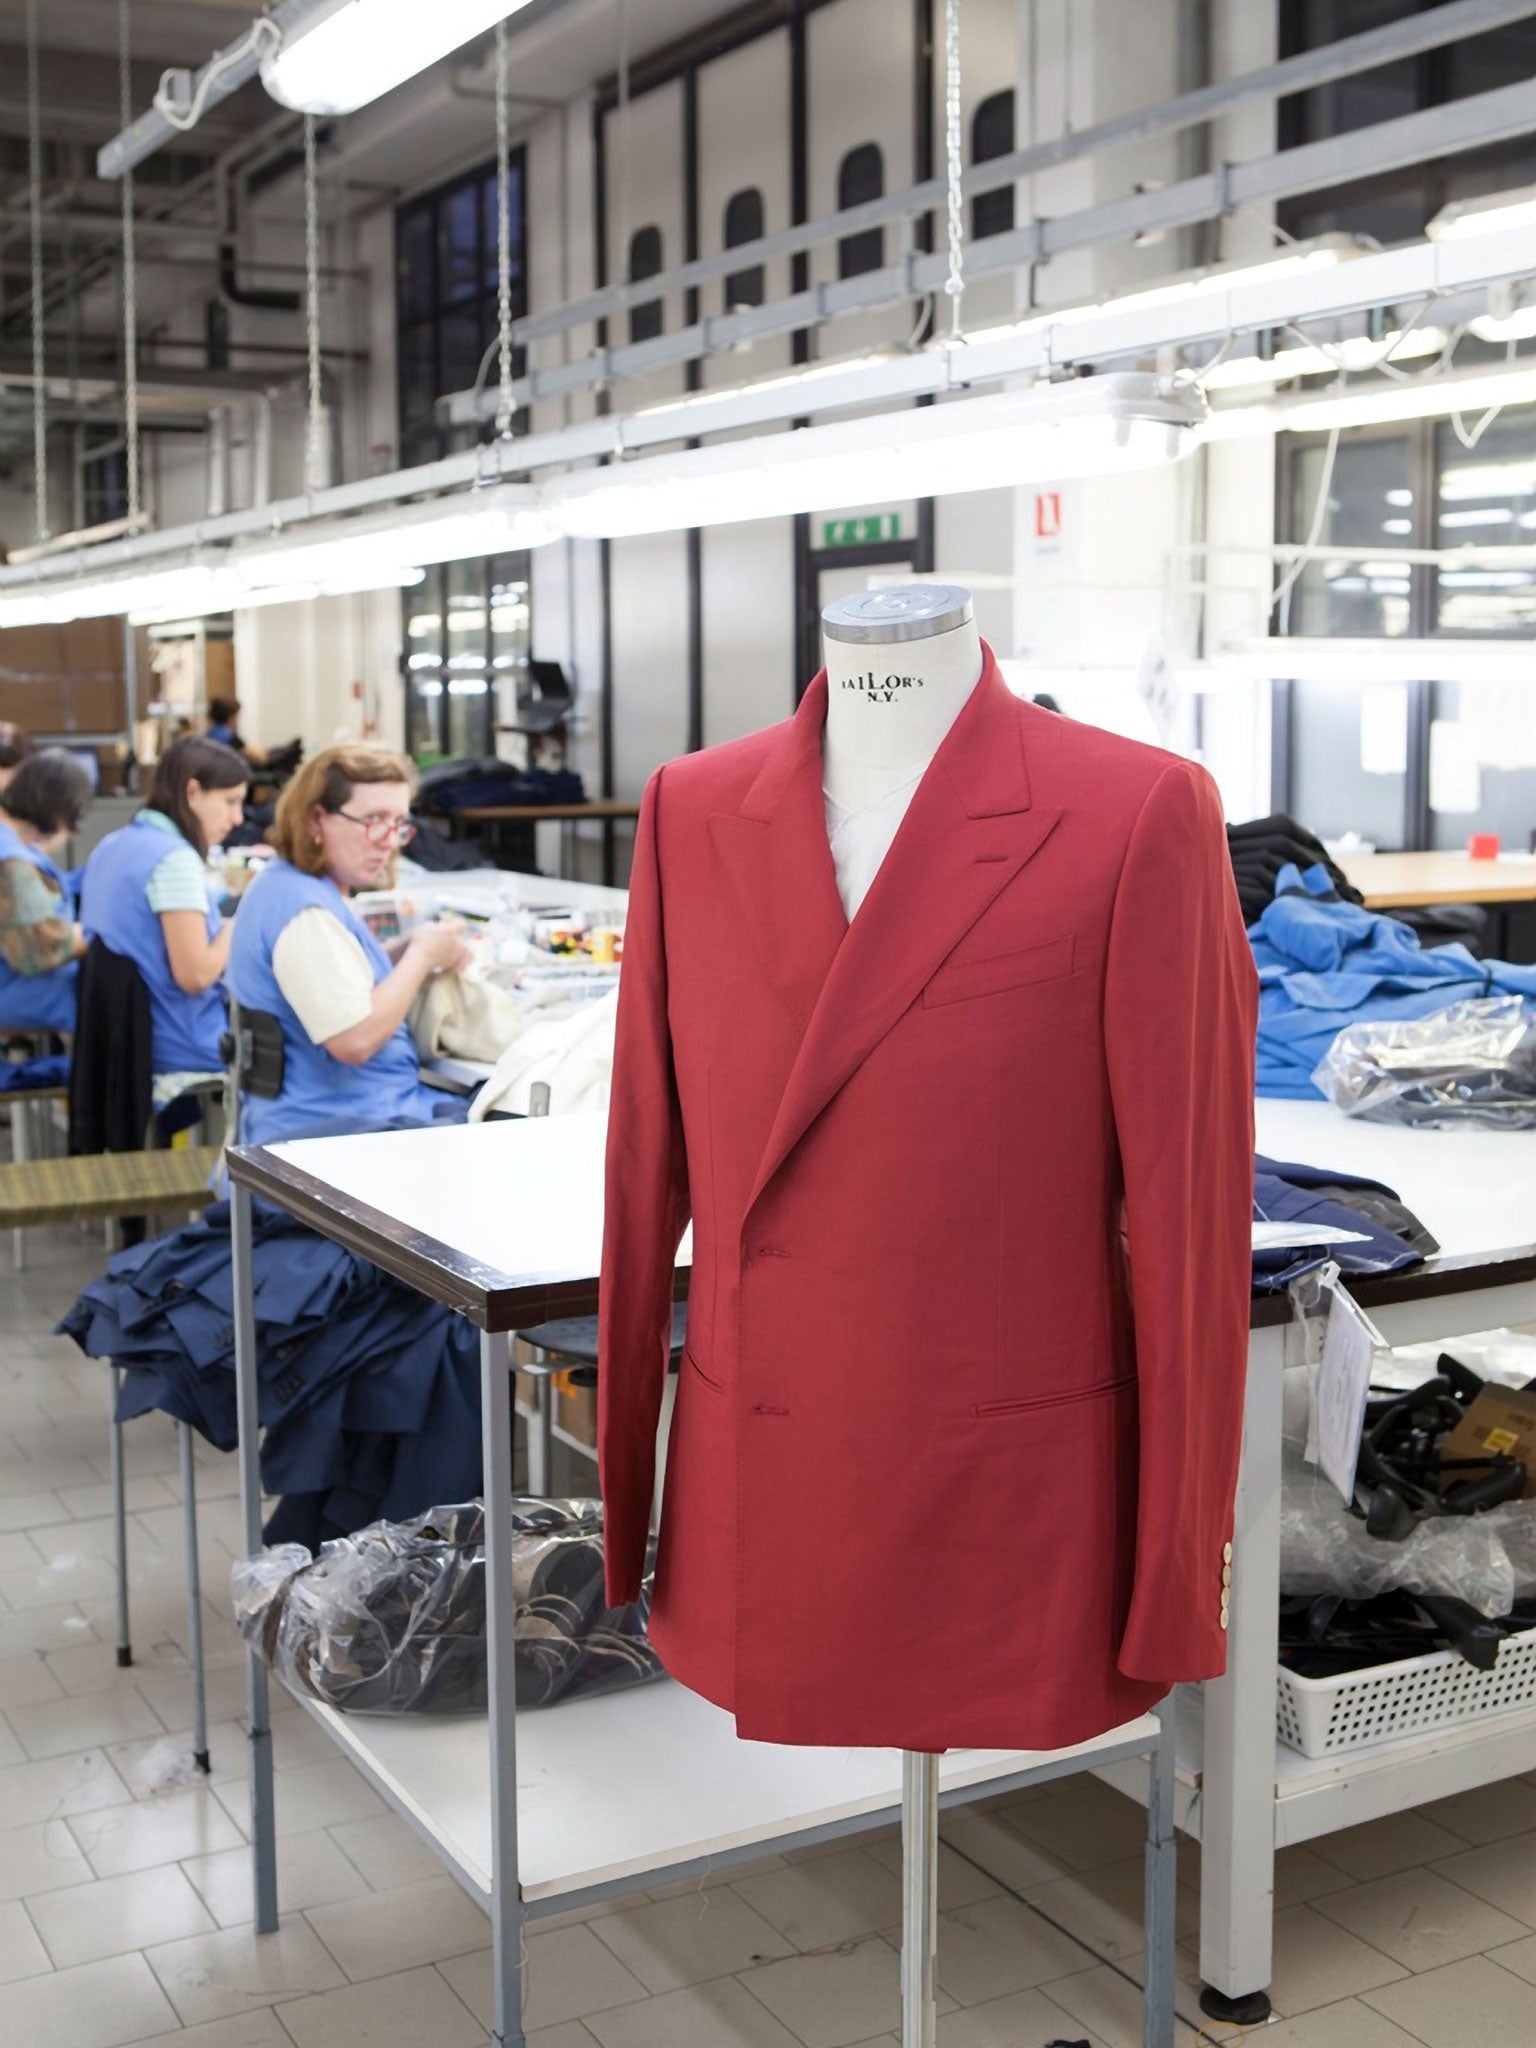 The Fabbrica Sartoriale Italiana turns out 450 hand-made suits a day